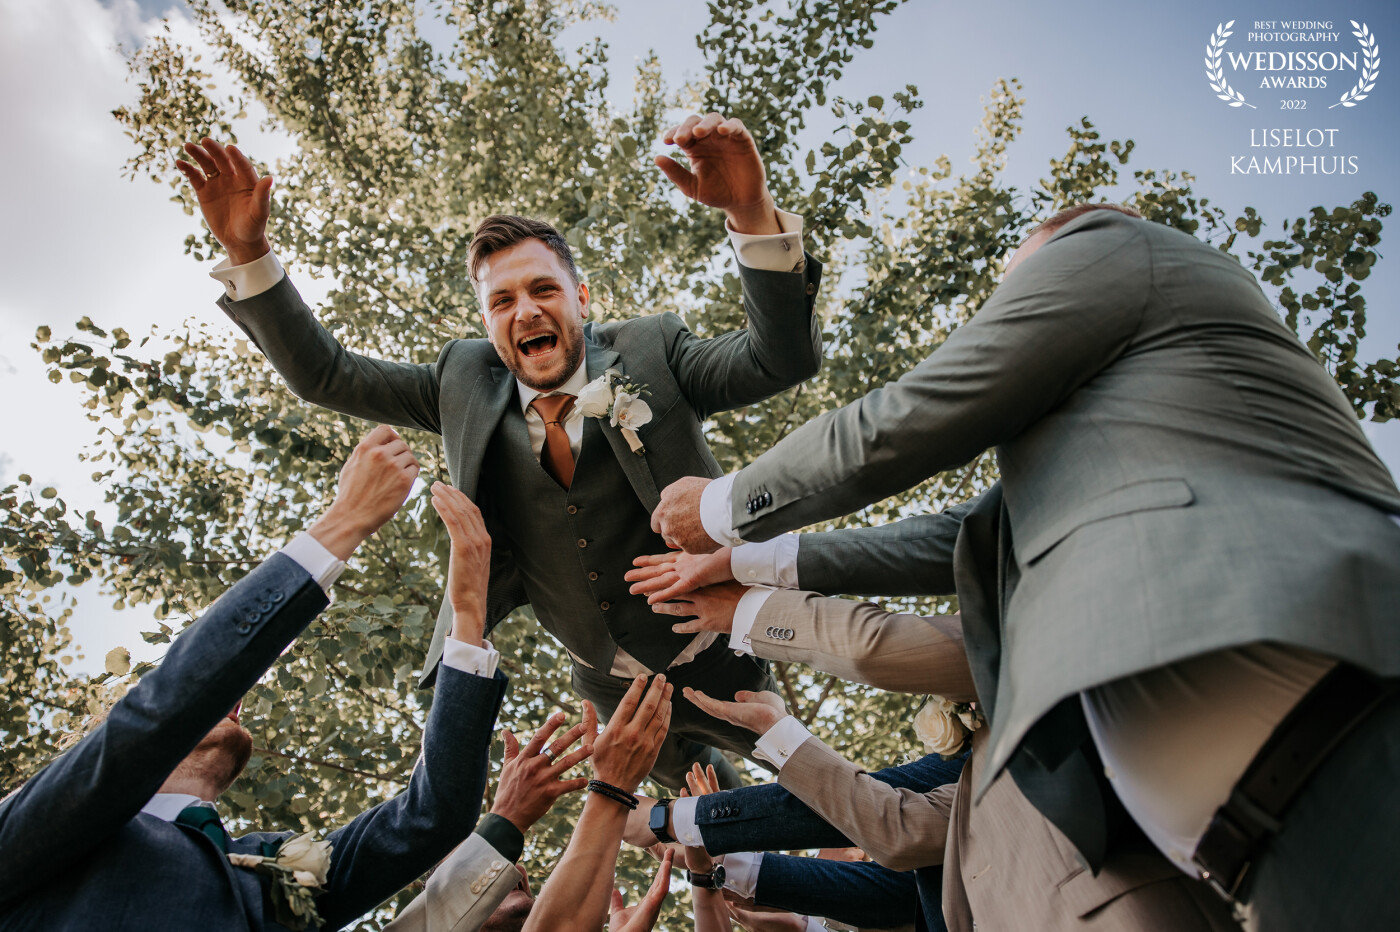 This groom wanted a different kind of picture, he went all-in!